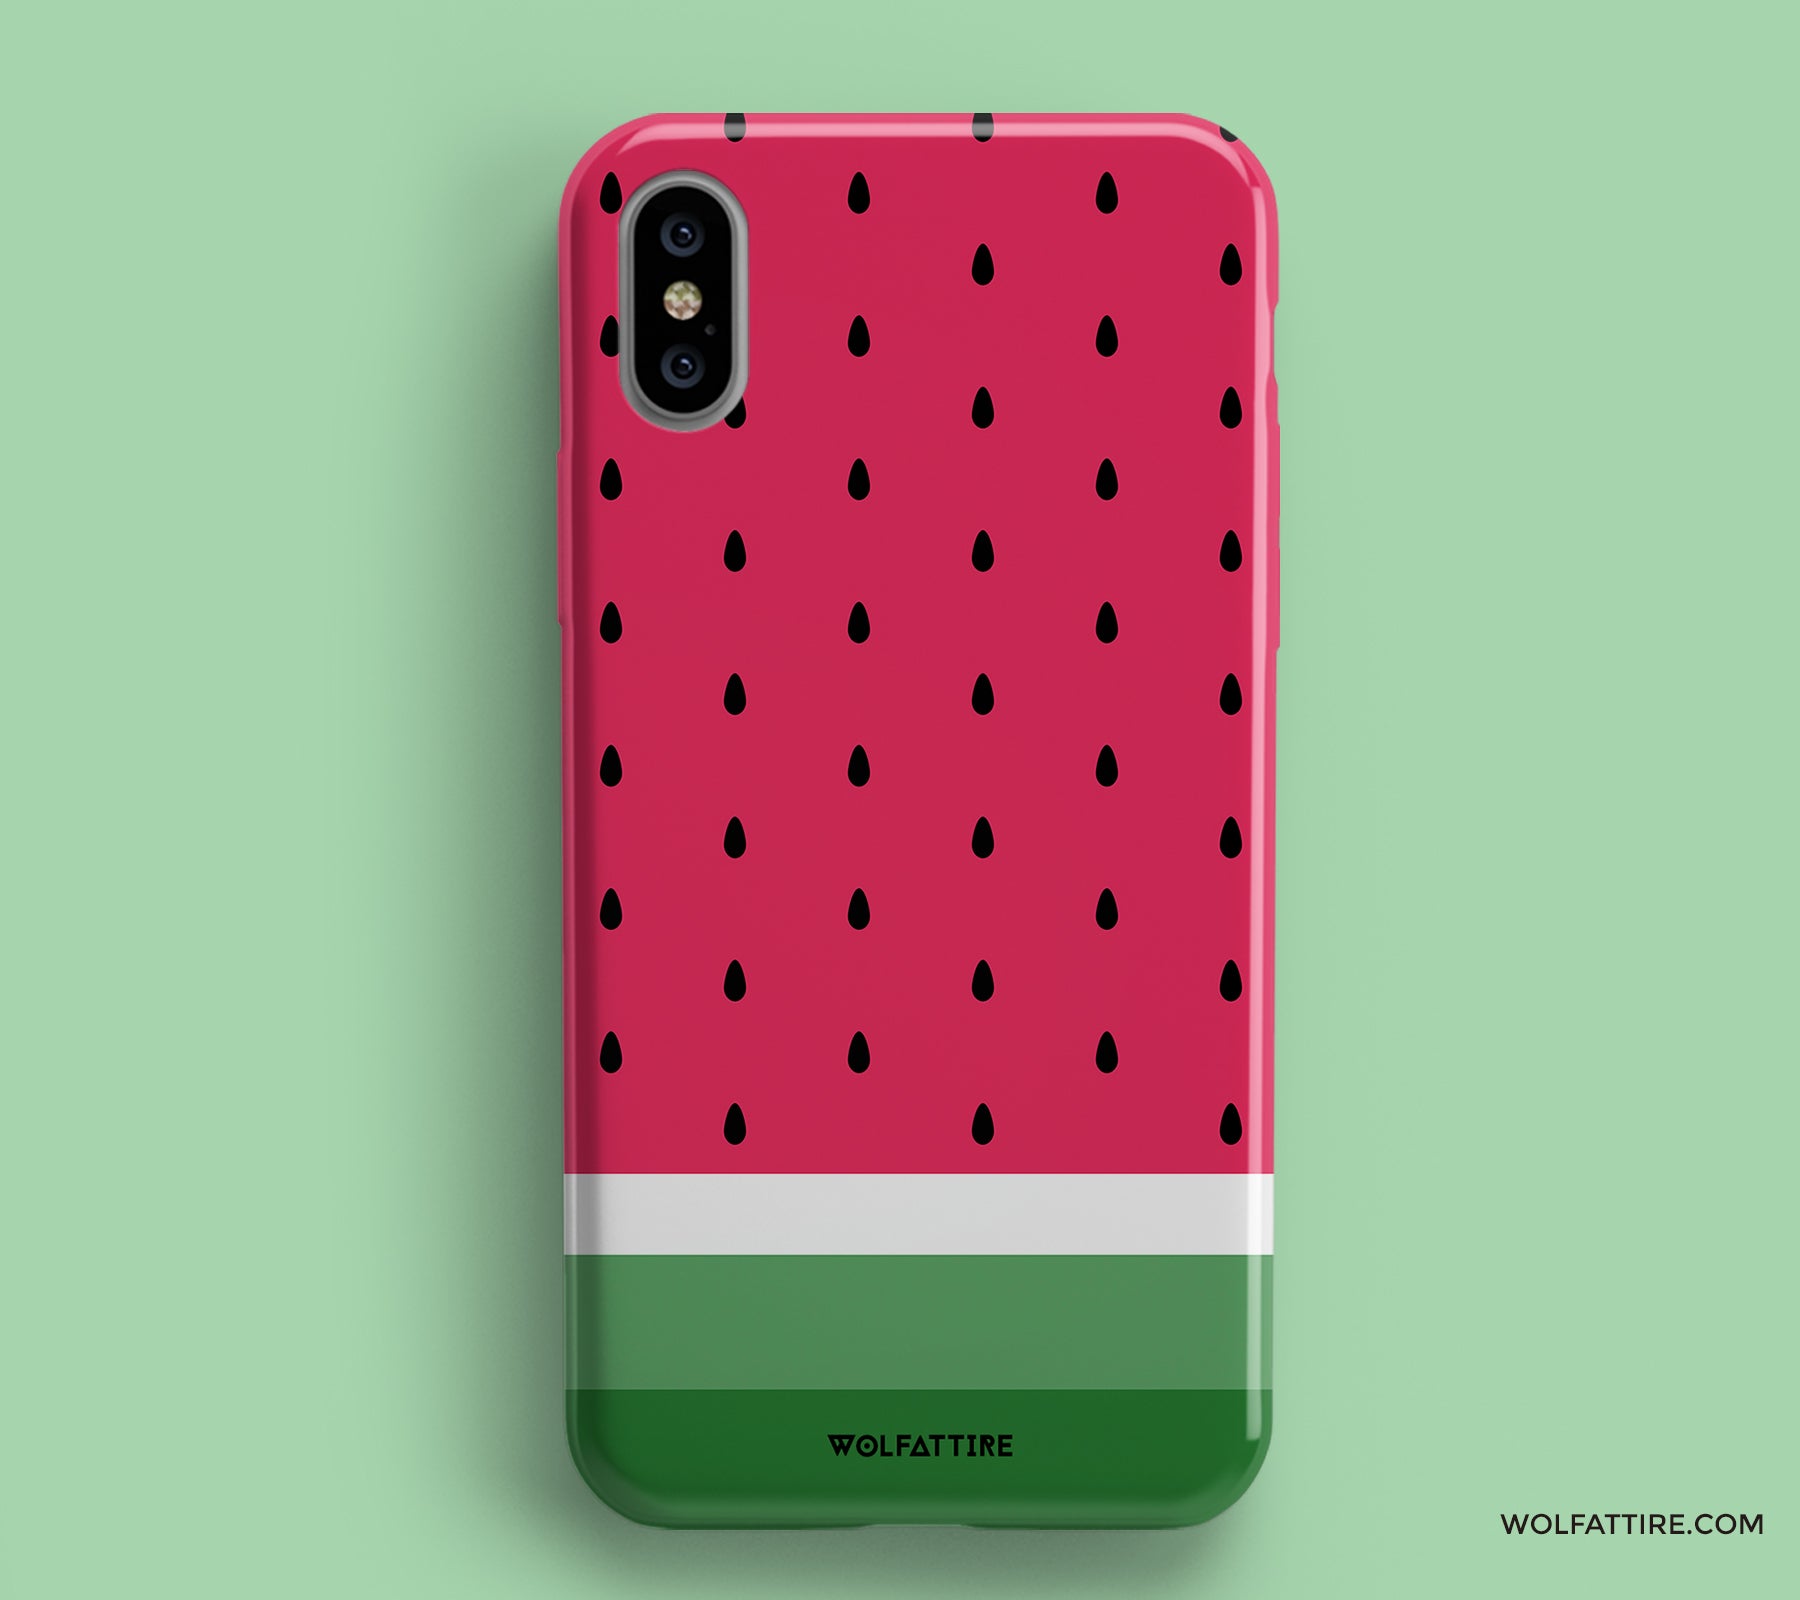 watermelon iphone x covers and cases | Shop online - wolfattire